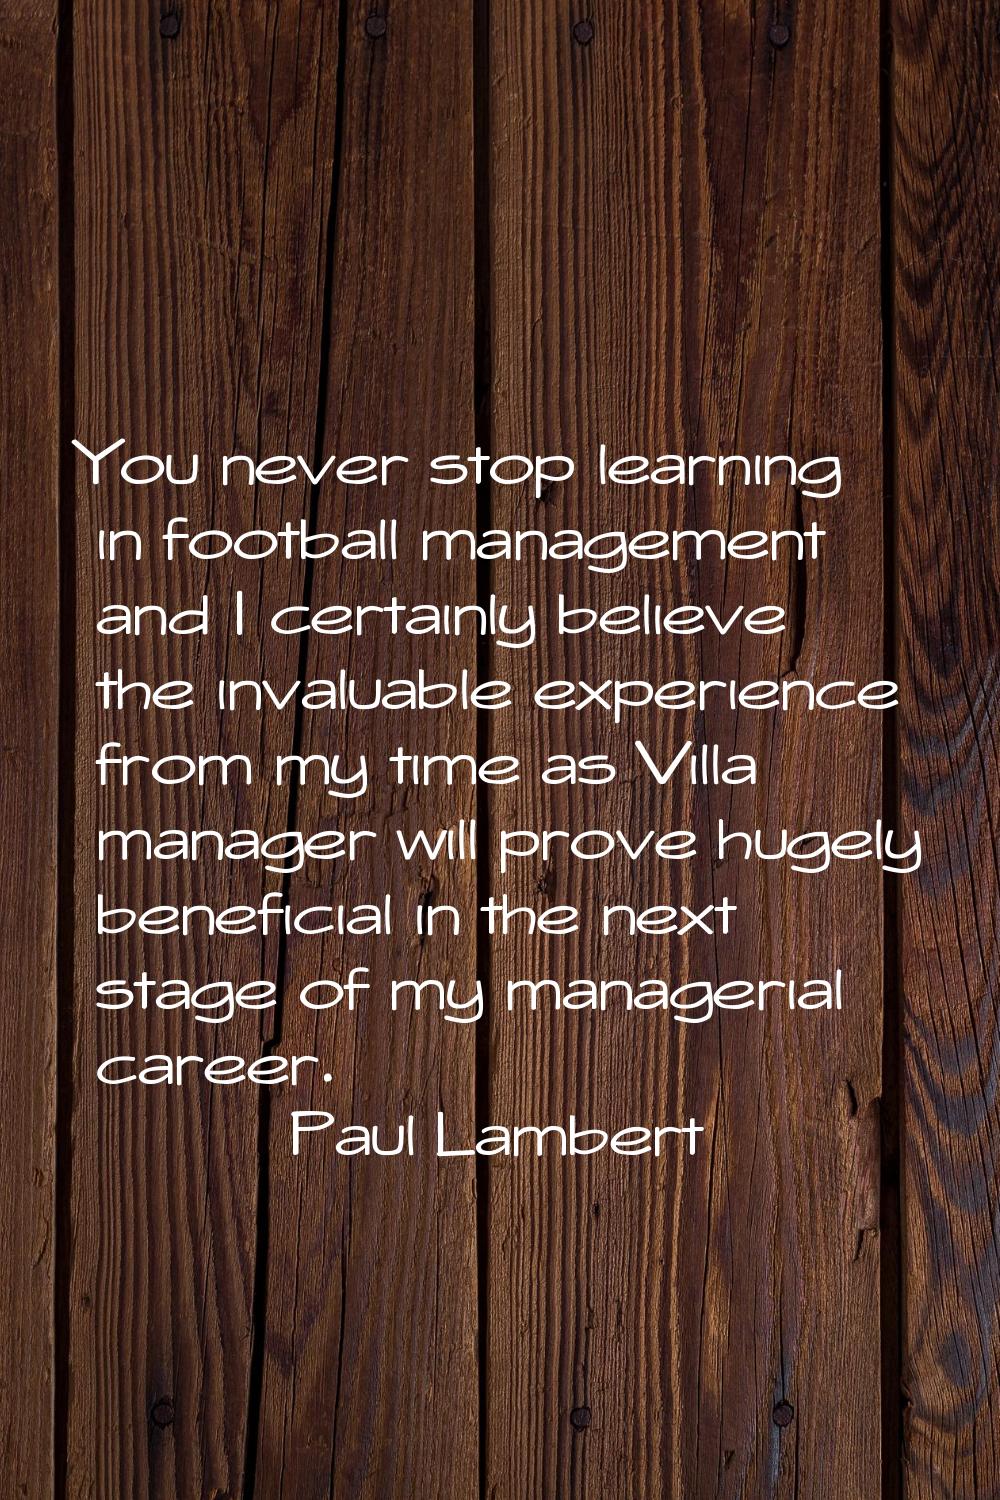 You never stop learning in football management and I certainly believe the invaluable experience fr